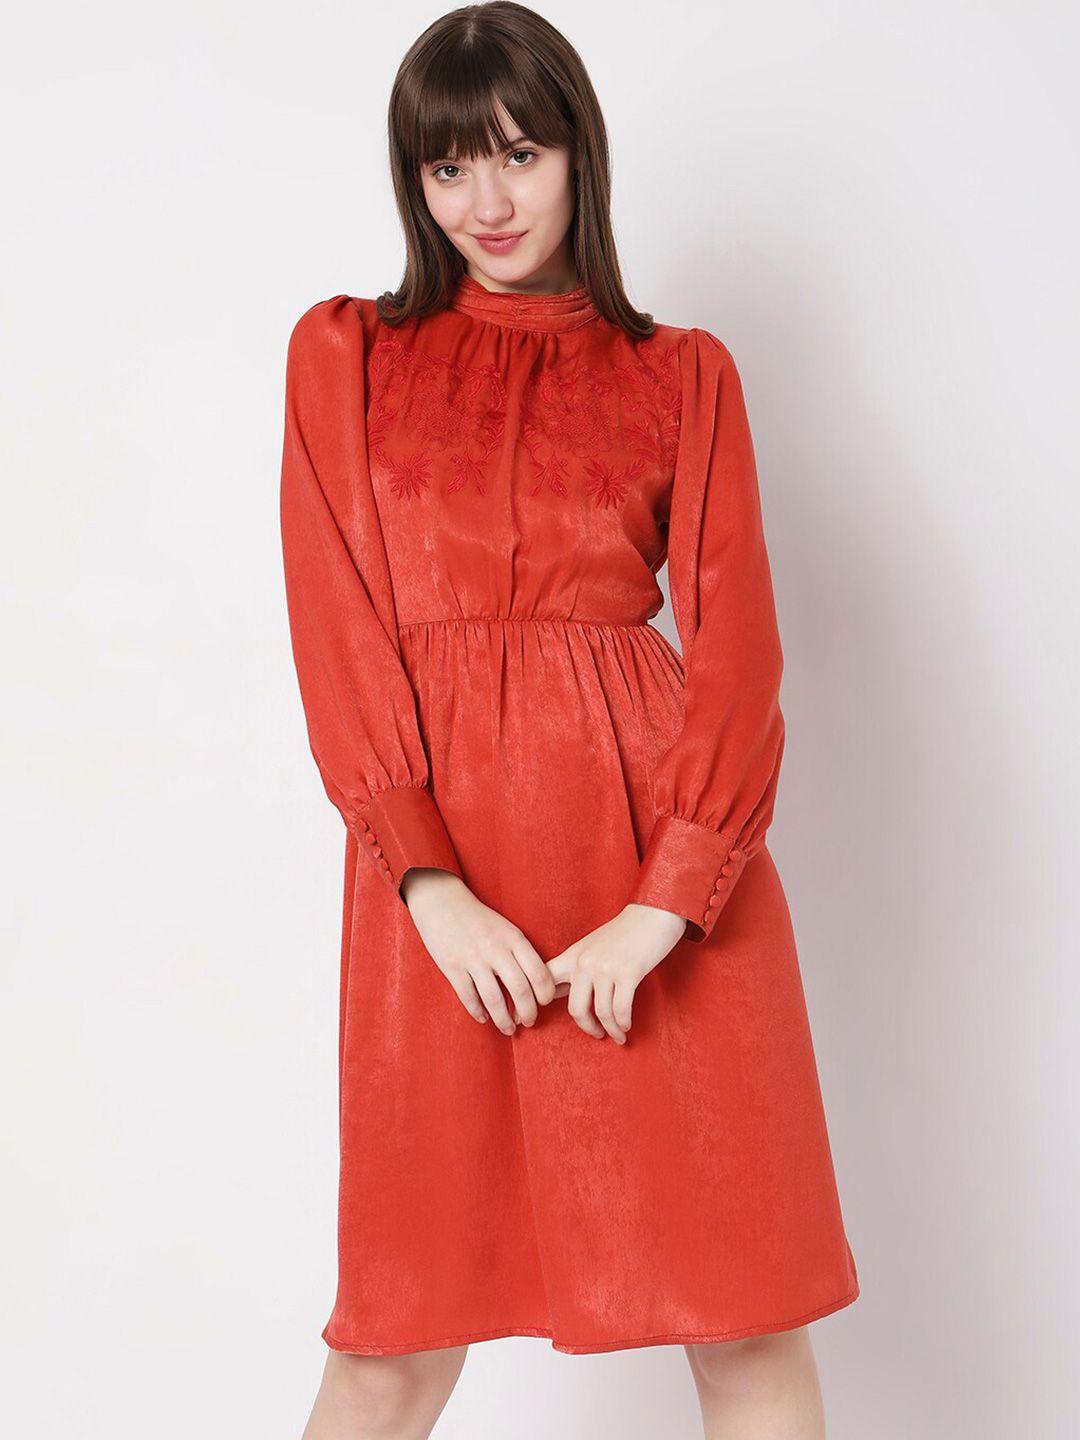 vero moda high neck cuffed sleeve embroidered fit & flare dress